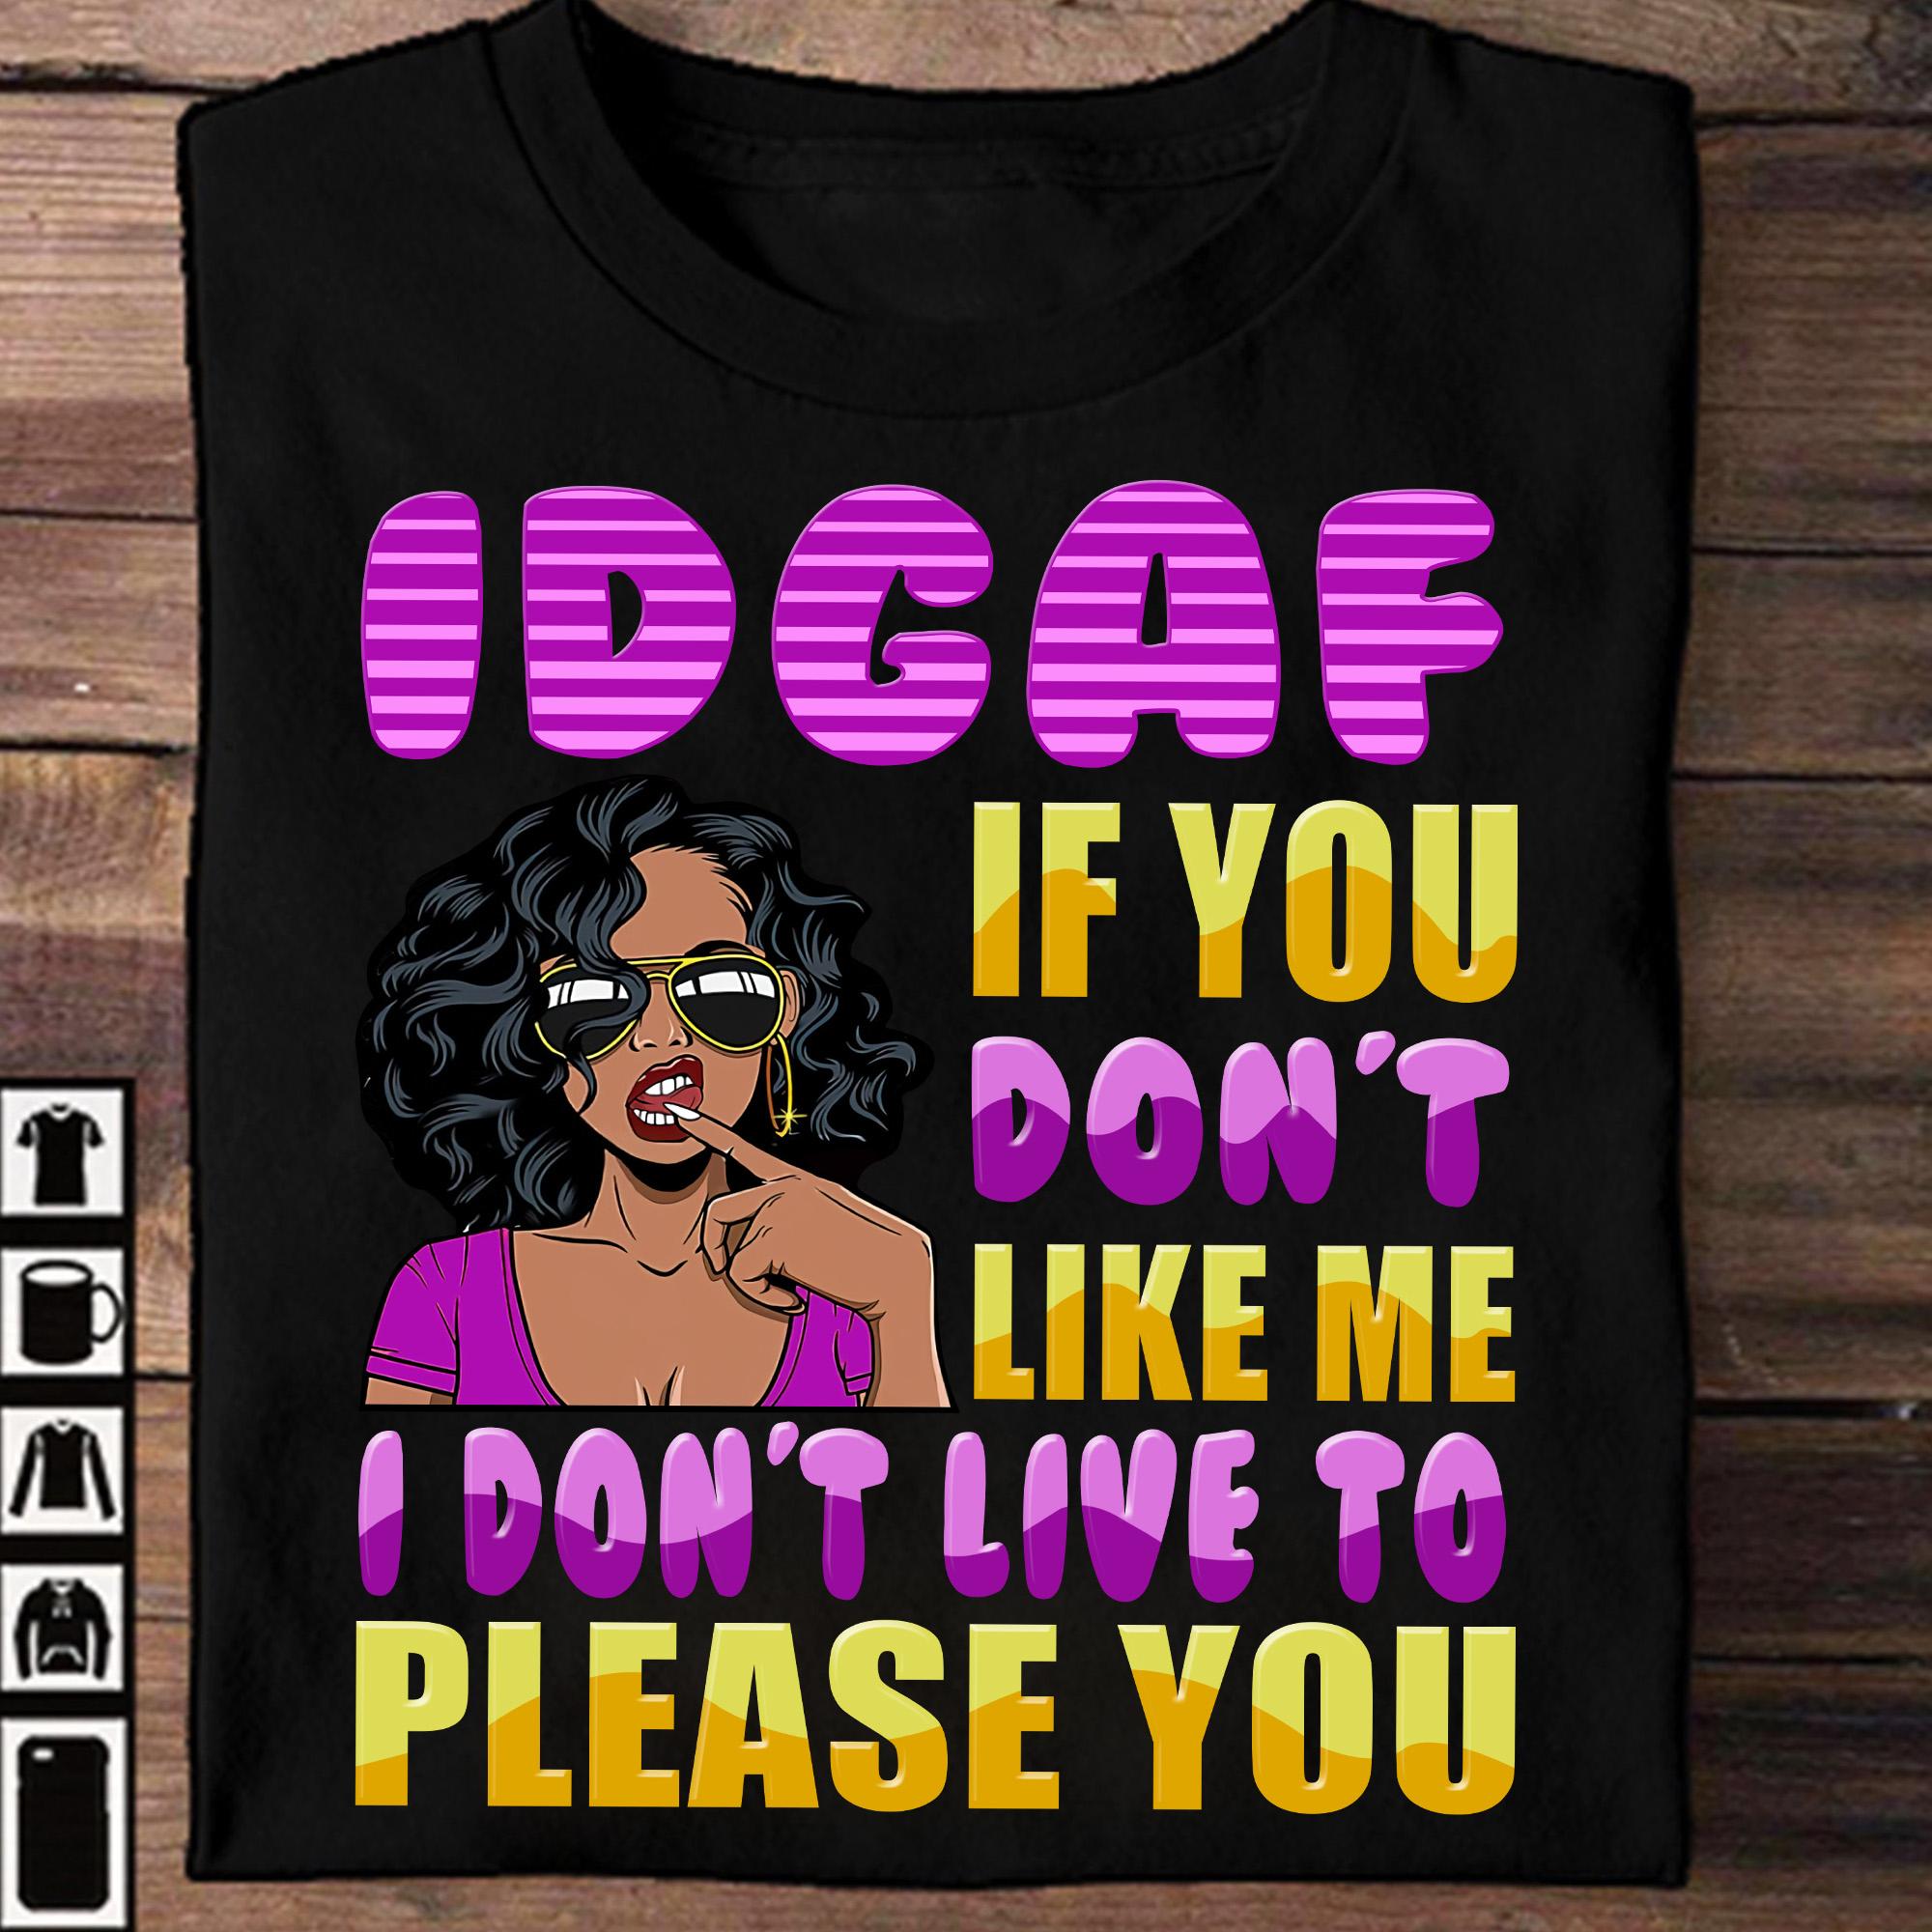 Black Girl - IDGAF If you don't like me i don't live to please you